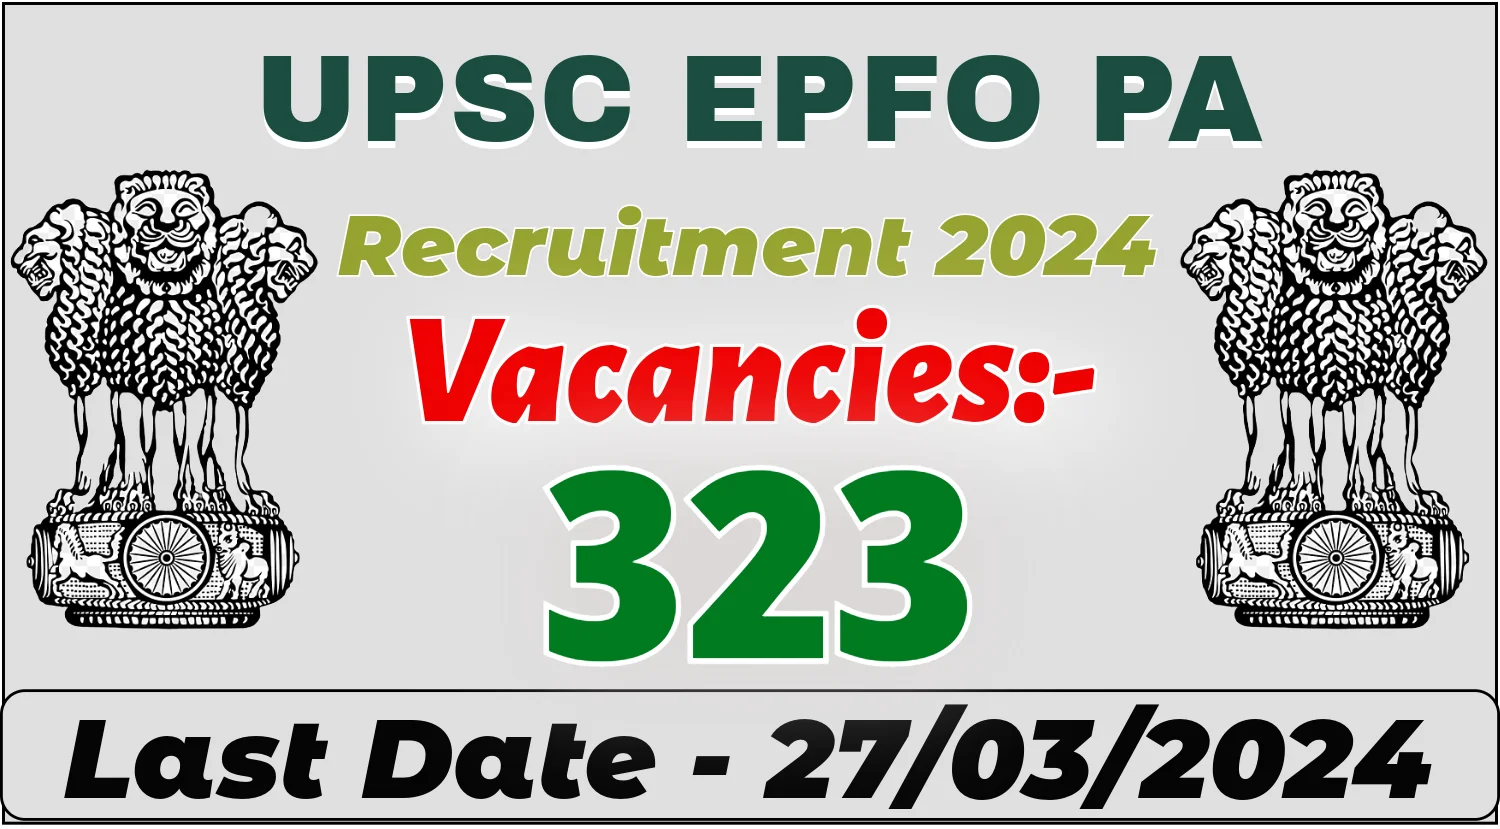 UPSC EPFO PA Recruitment 2024 Apply for 323 Posts Apply Now